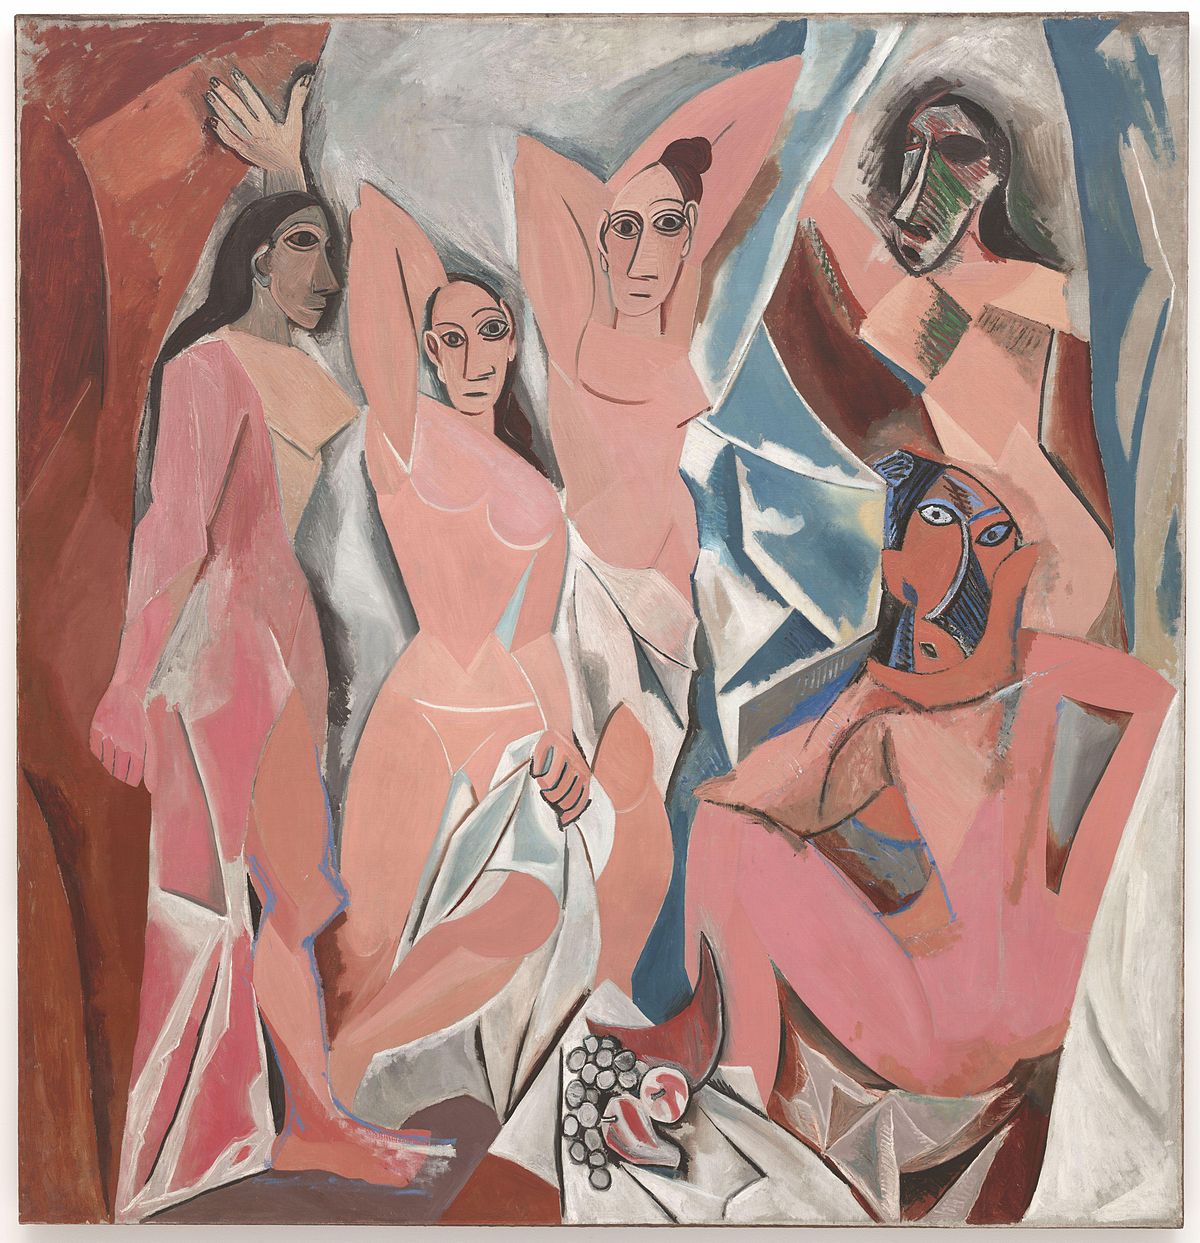 Unveiling the Masterpiece: Exploring “Les Demoiselles d’Avignon” at the Museum of Modern Art, New York